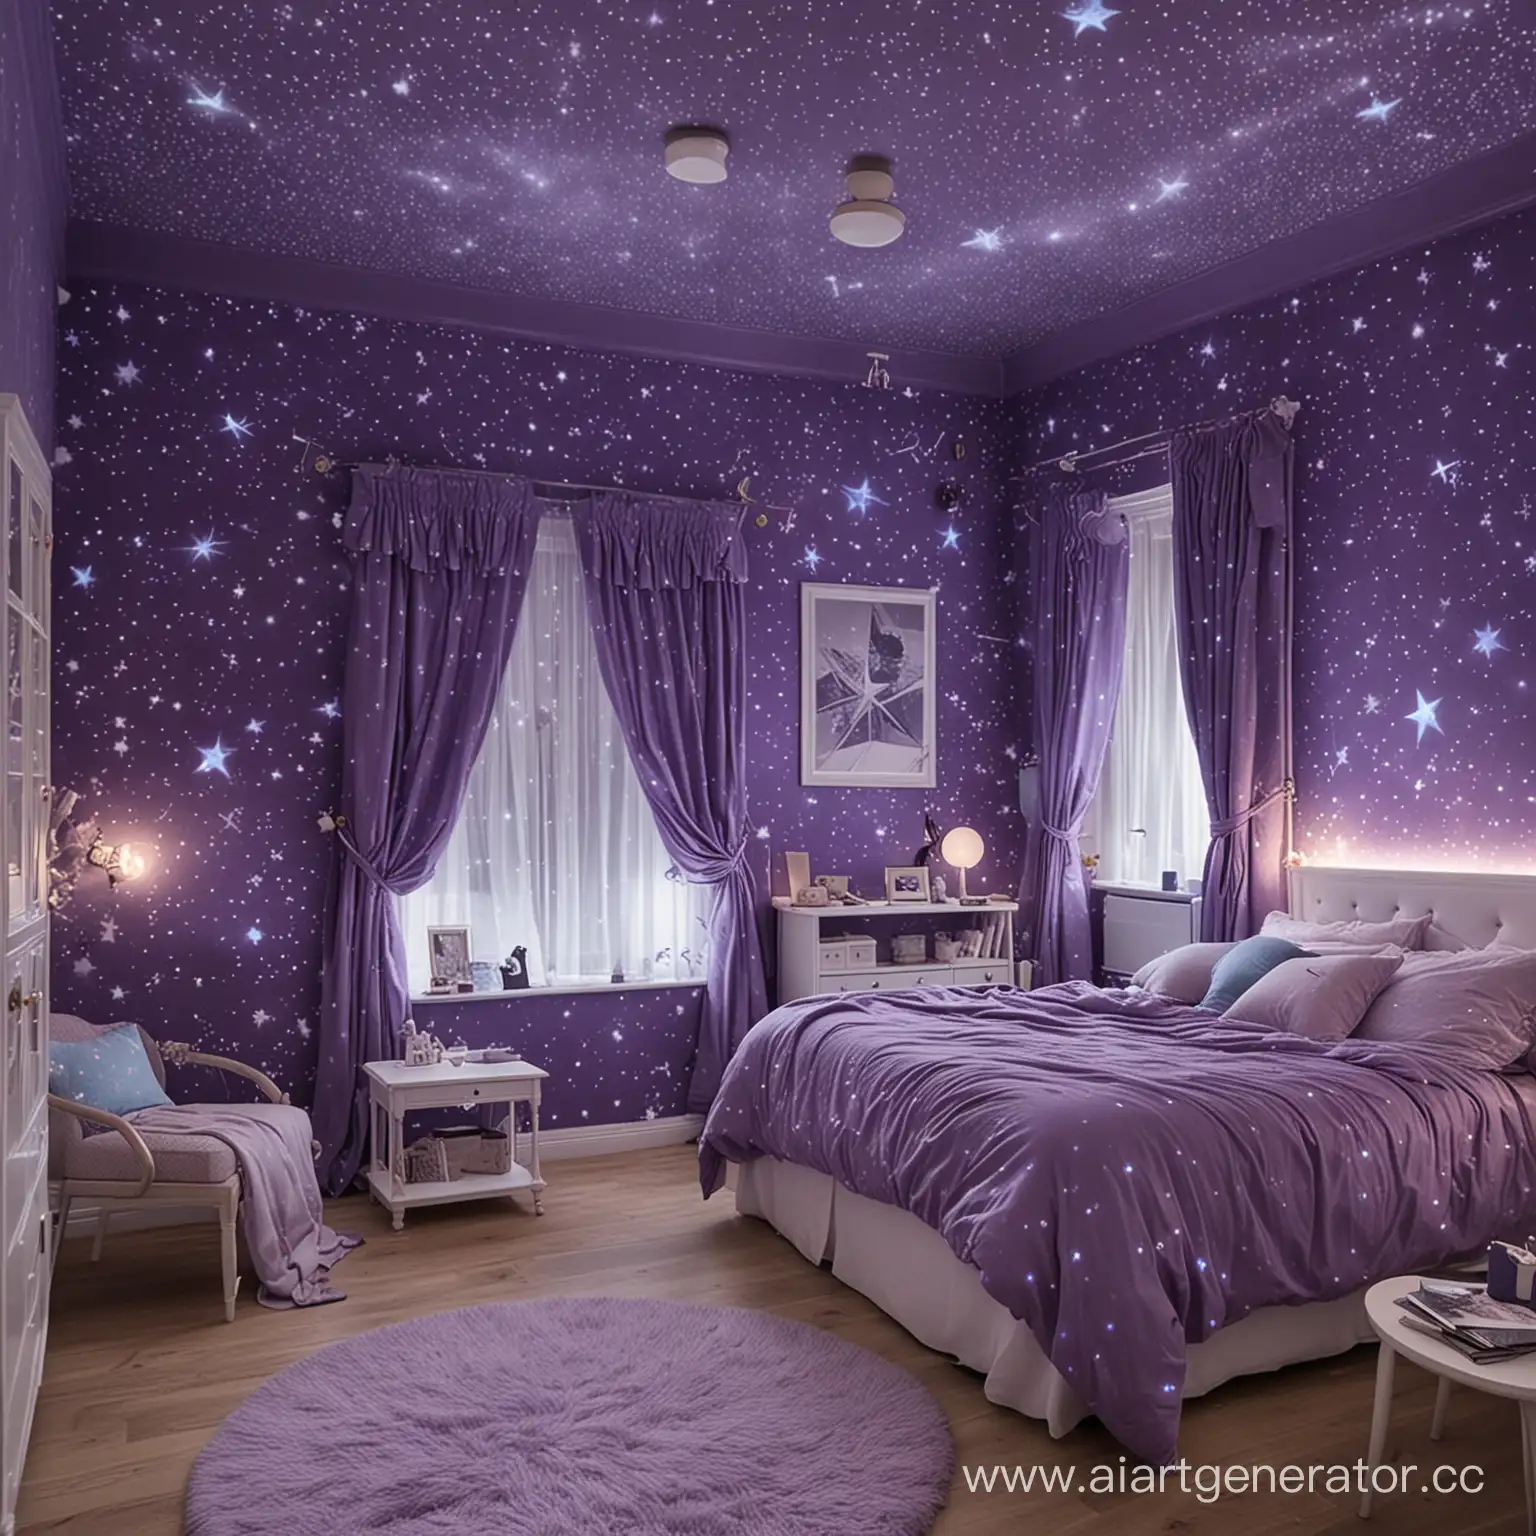 StarThemed-Girls-Bedroom-in-Purple-and-Blue-Shades